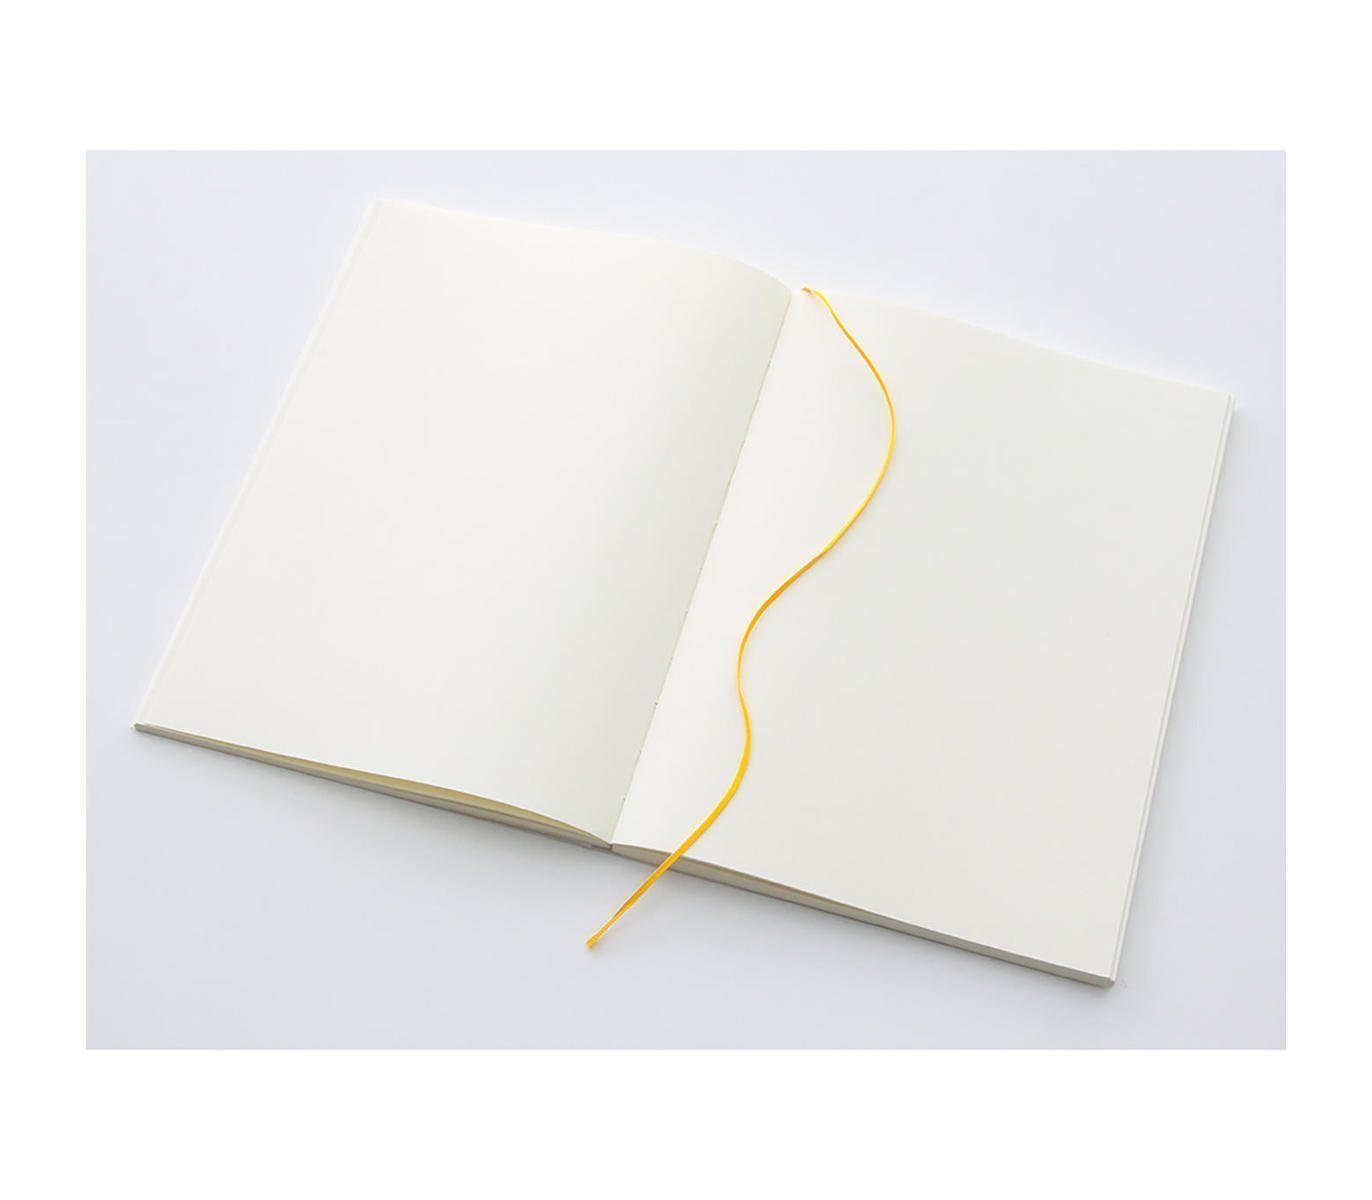 Midori MD notebook A5 Plain. Shows stickers. Yellow silk string. Notebook for journaling, note taking and sketching.